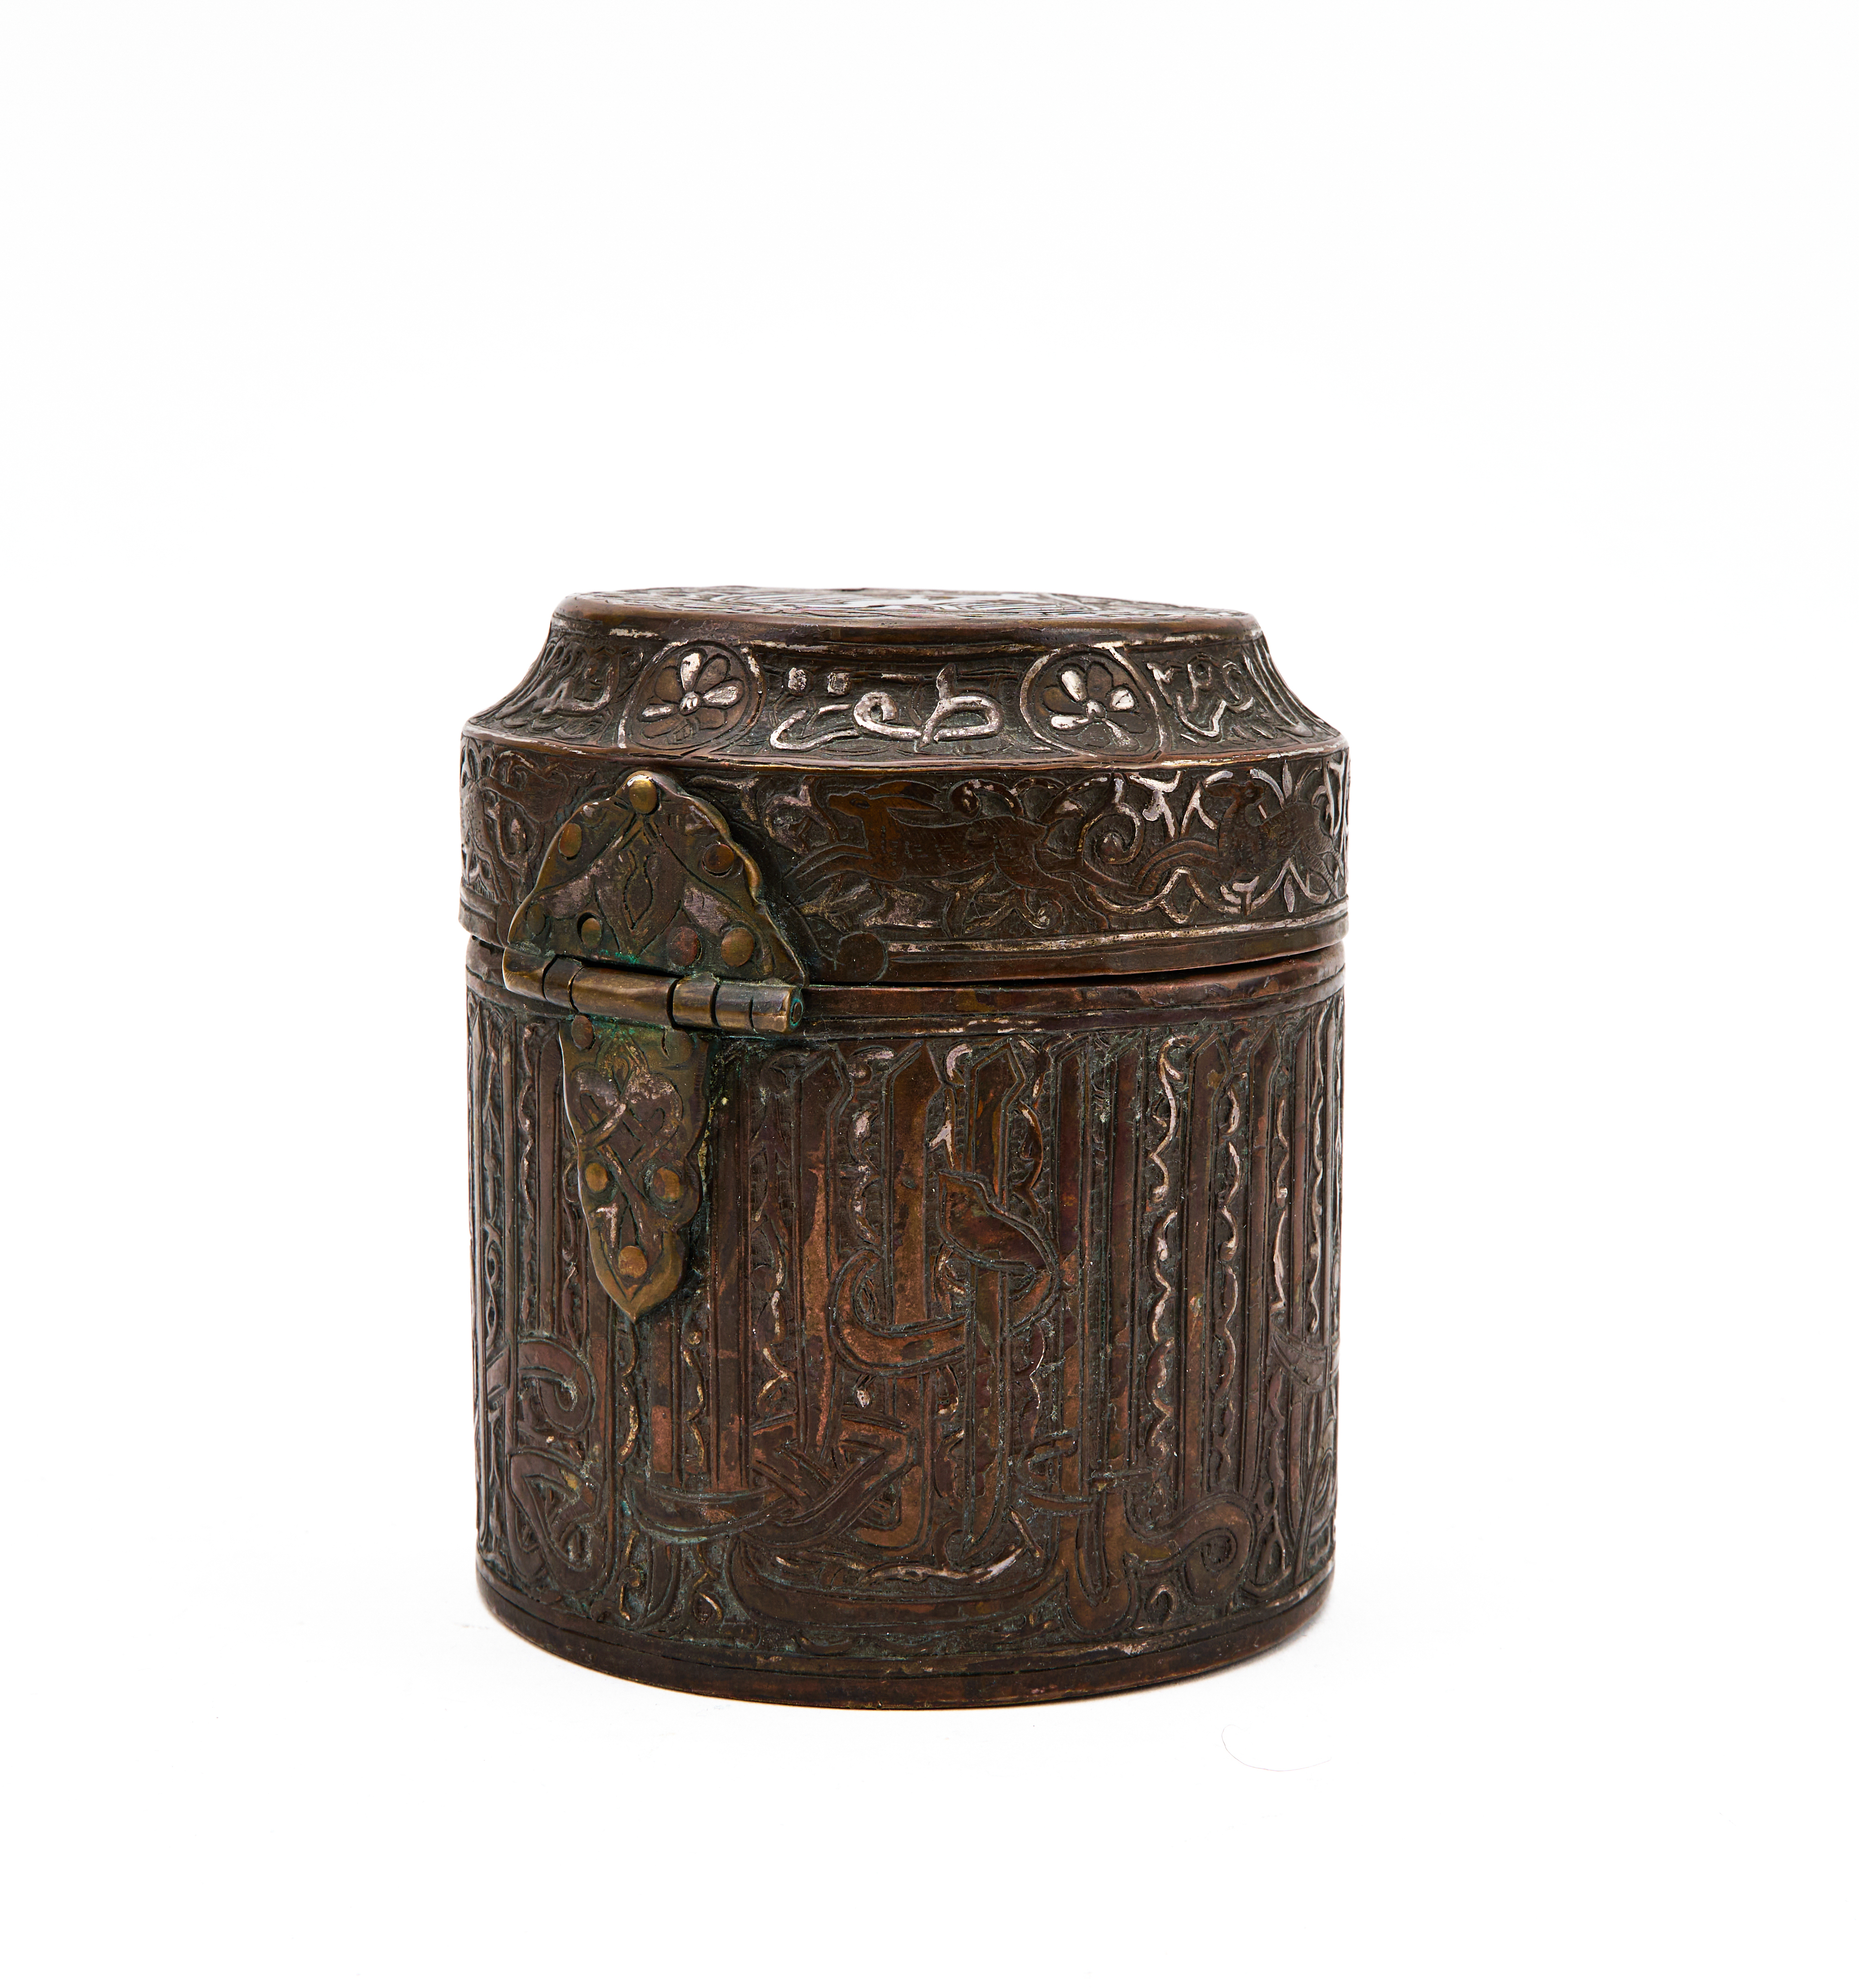 A SILVER INLAID SELJUK BRONZE INKWELL PENDANT, PERSIA, 12TH CENTURY - Image 5 of 8